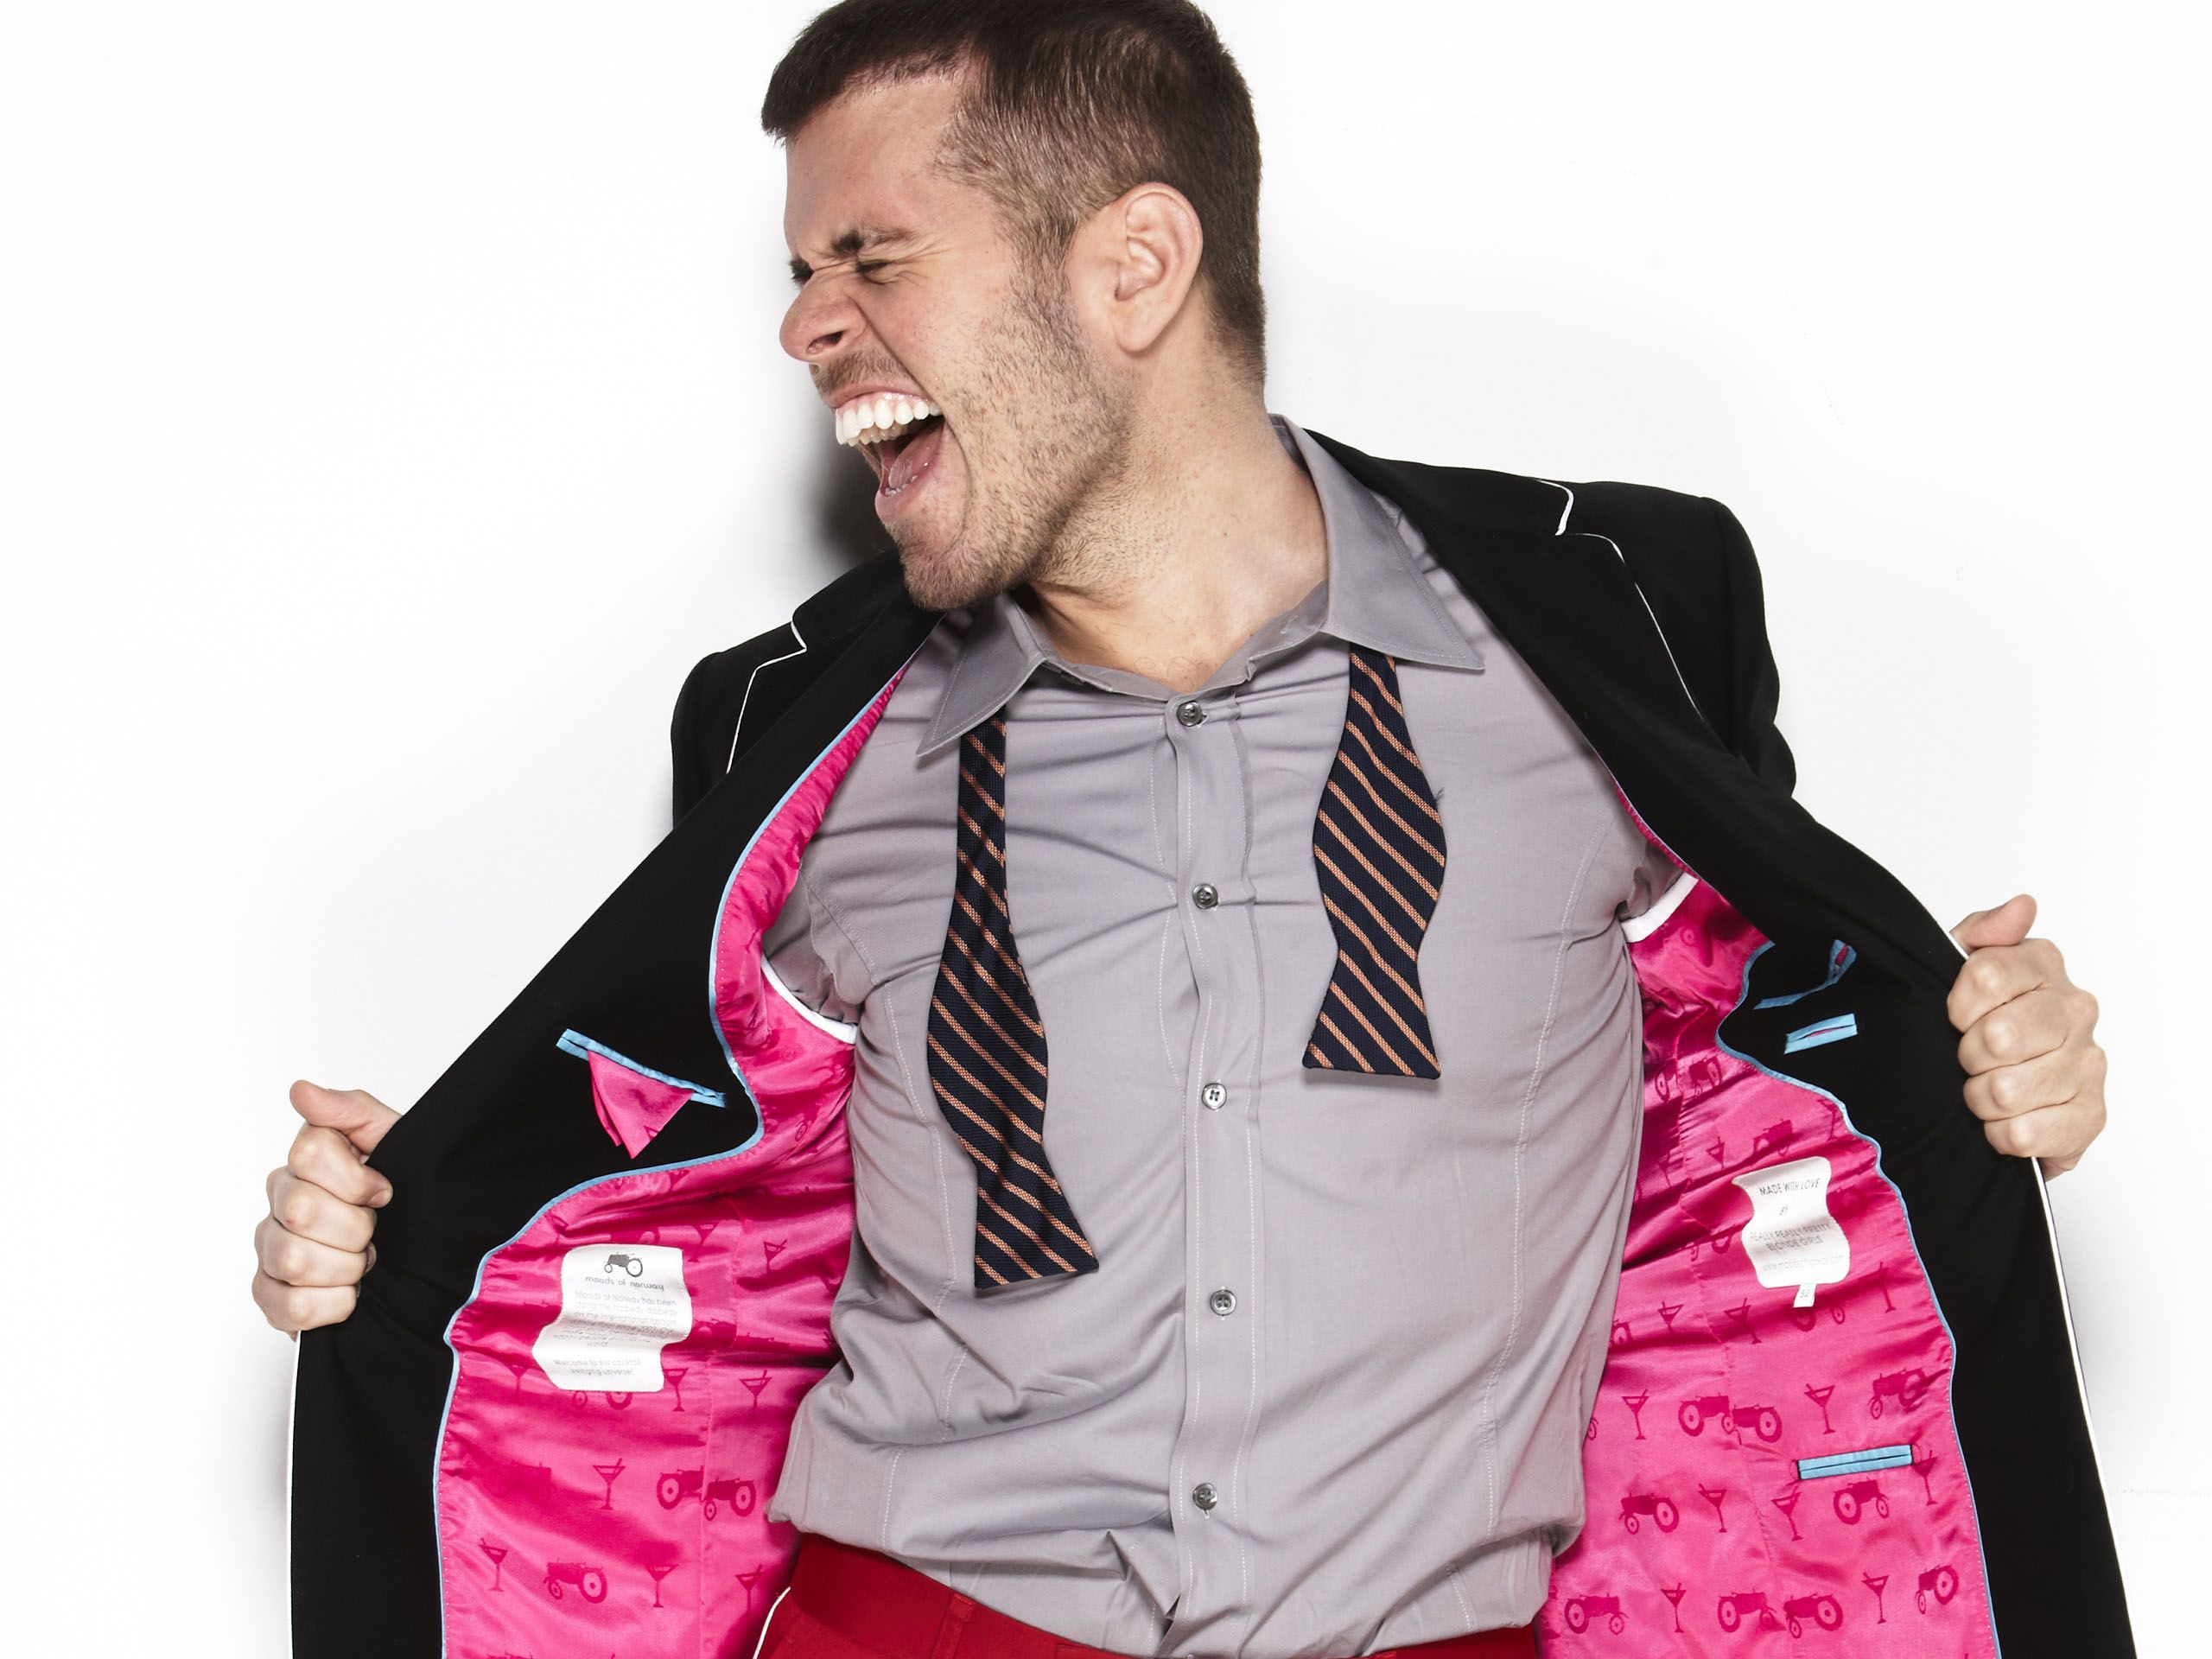 Perez Hilton – the name rings with infamy. He is known as THE Celebrity blogger. He is also known as someone with an incredibly negative reputation.